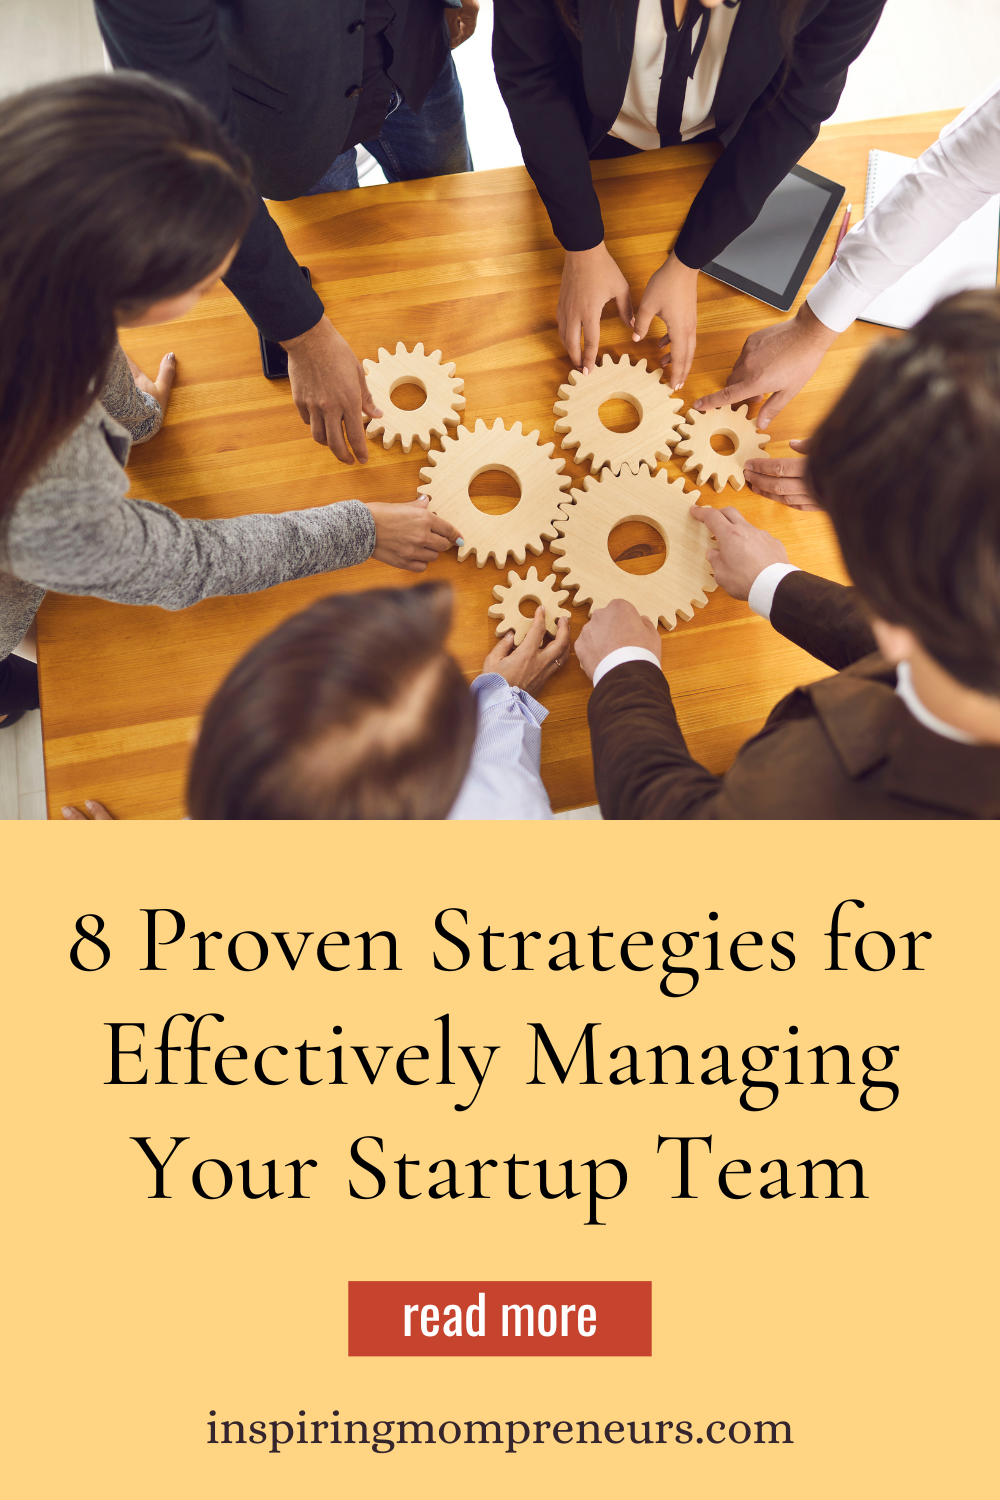 A significant factor in a new company's success is having a competent and cohesive staff. Here are 8 effective strategies for managing your startup team.